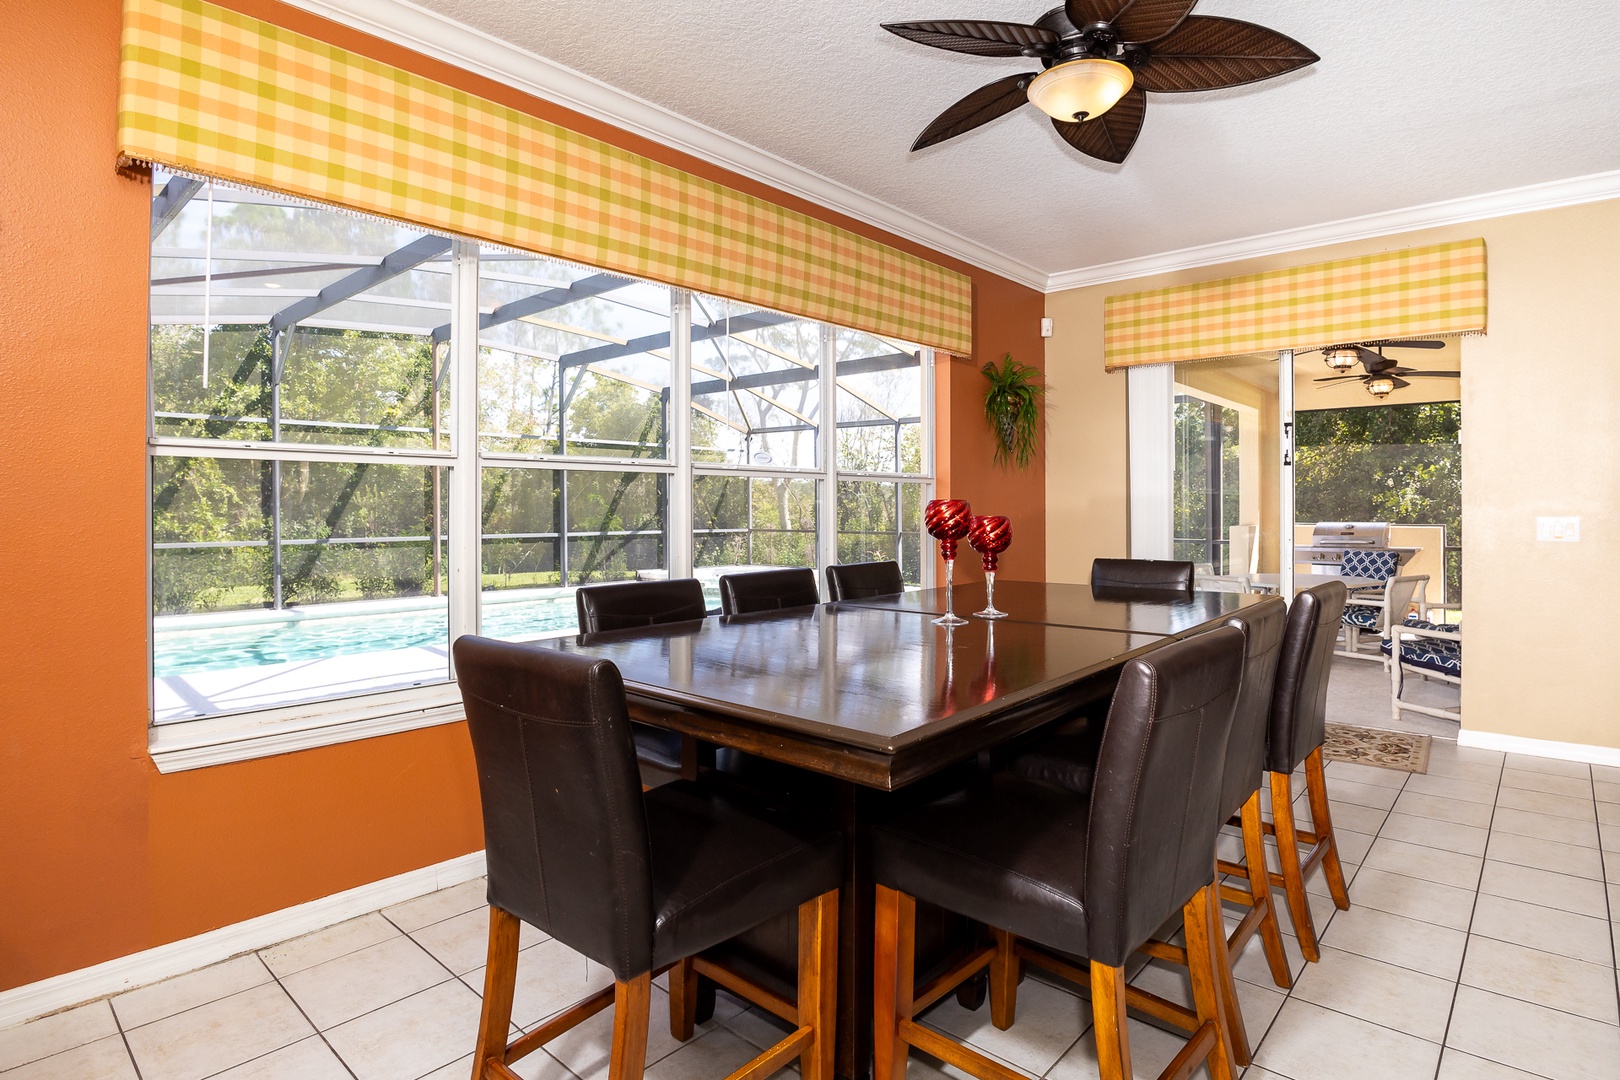 An additional dining table is available off the kitchen, with seating for 8